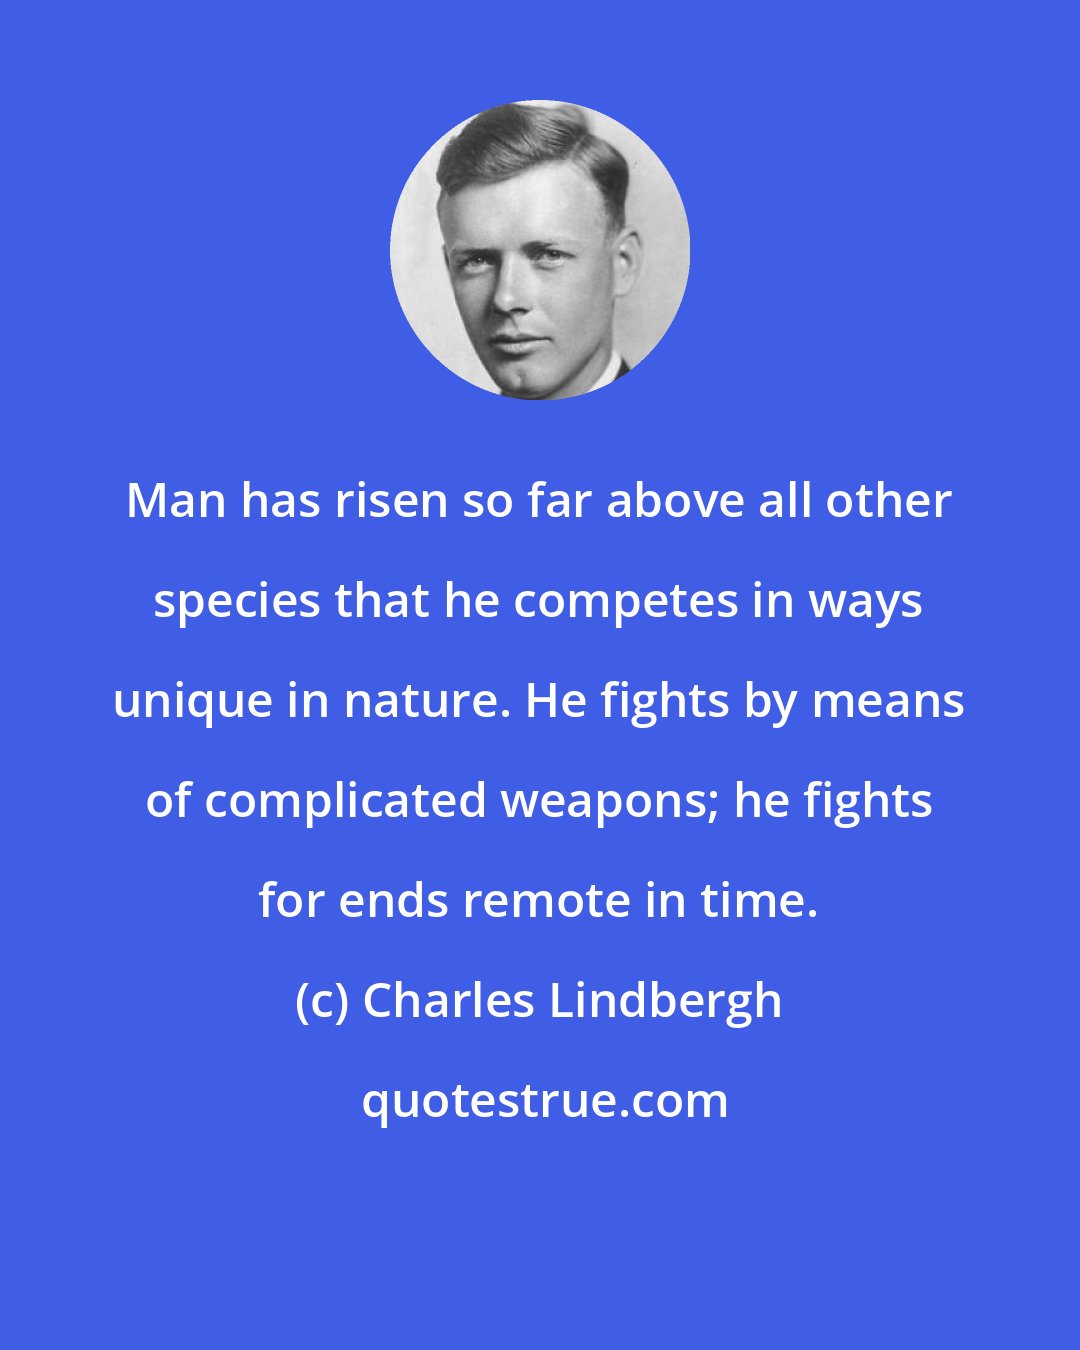 Charles Lindbergh: Man has risen so far above all other species that he competes in ways unique in nature. He fights by means of complicated weapons; he fights for ends remote in time.